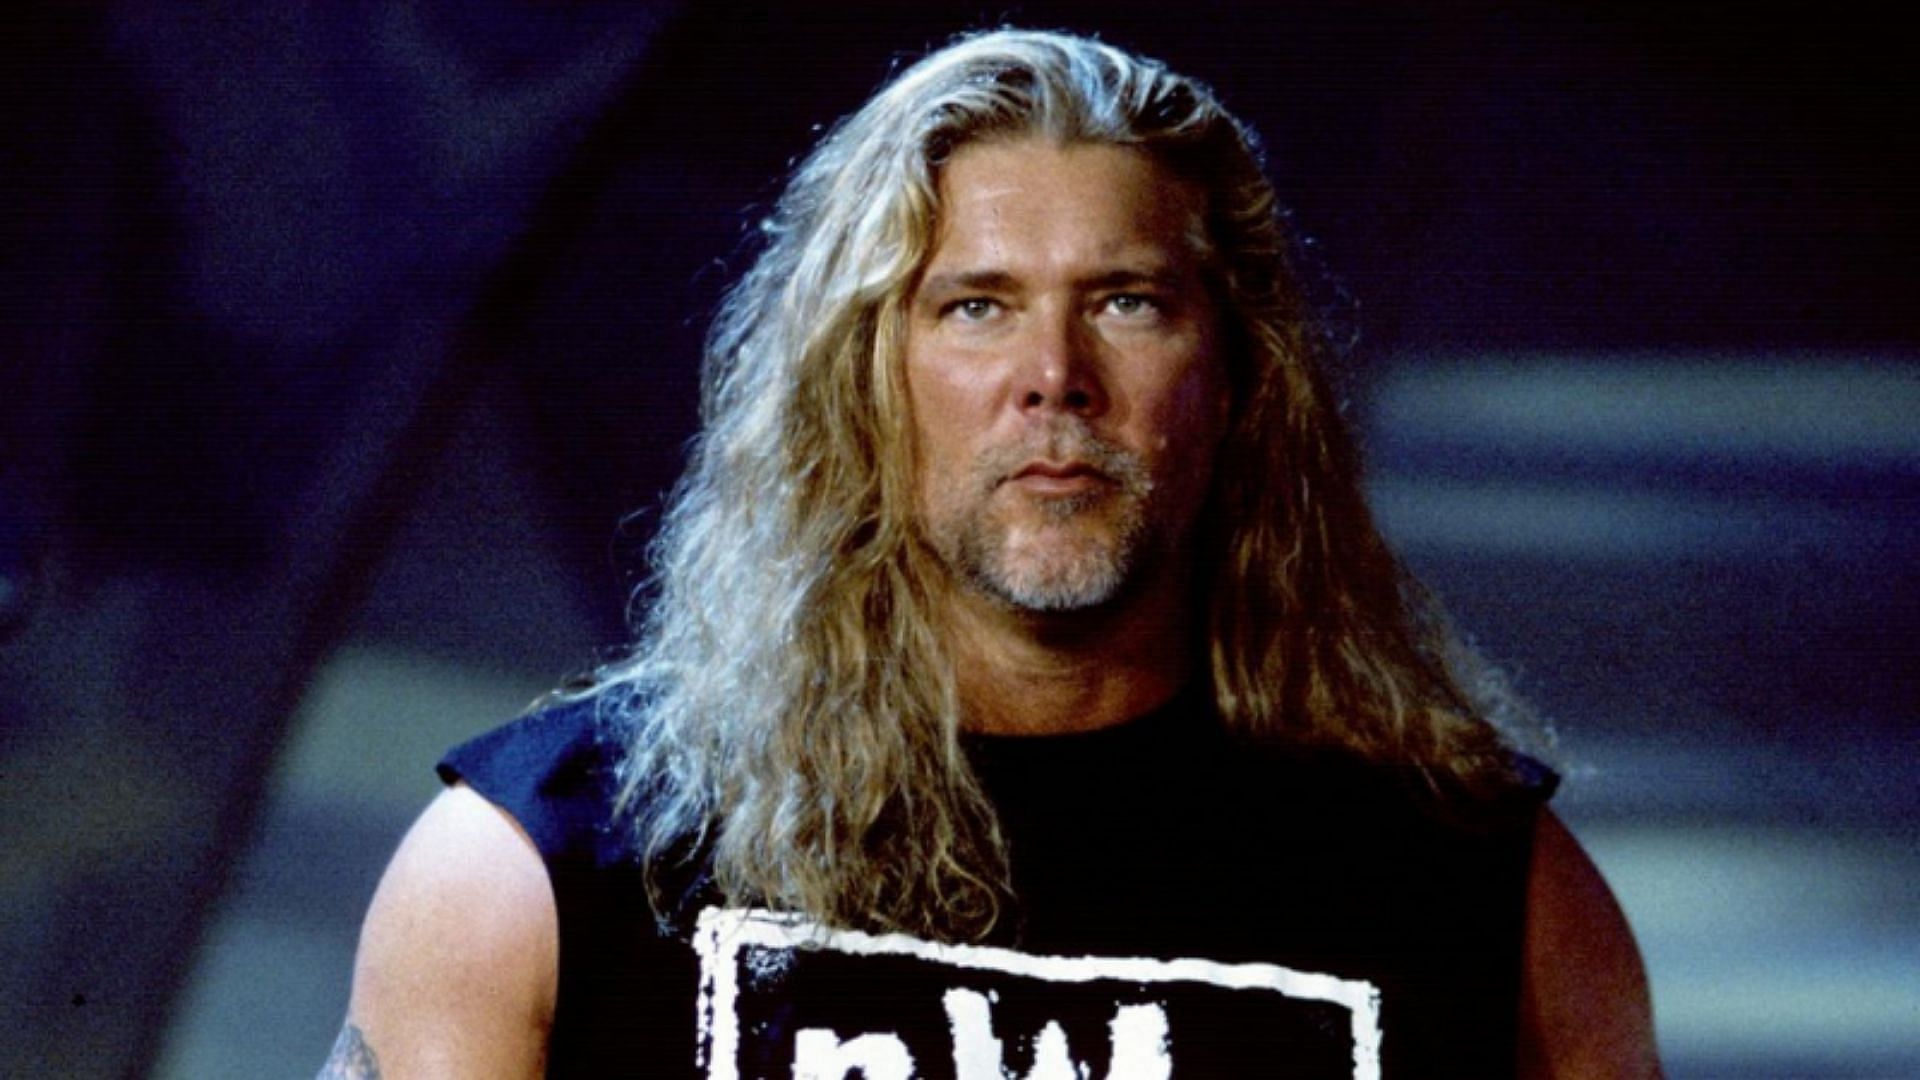 Former WCW and WWE star Kevin Nash